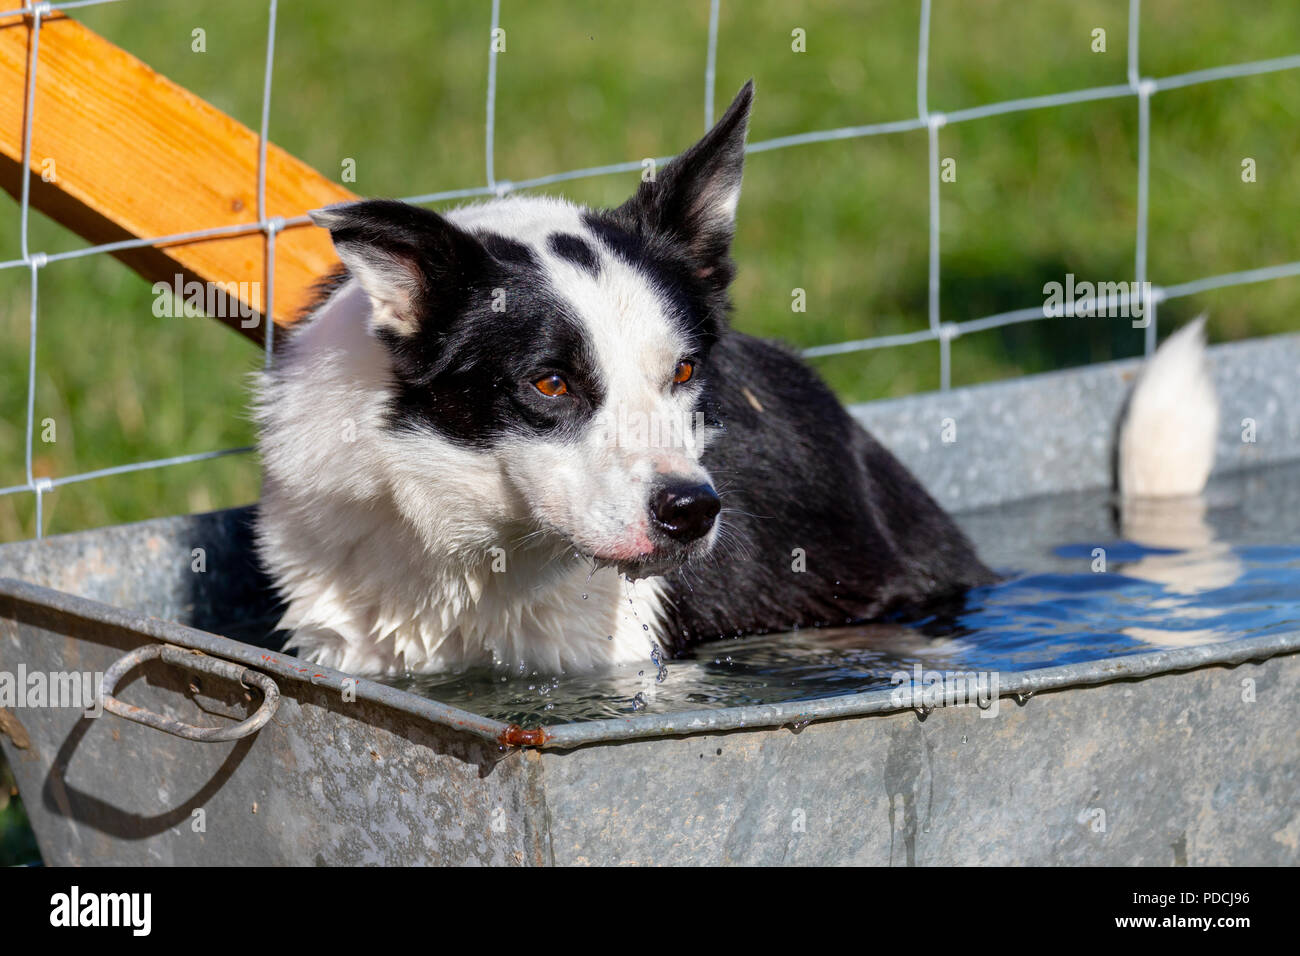 Nannerch, North Wales,  UK Weather: Hot and sunny weather perfect for the Welsh National Sheep Dog Trials being held in the rural village of Nannerch at the Penbedw Estate in Flintshire. A sheep dog called Meg relaxing in the cold water provided for the dogs to cool down after competing at the National Sheep Dog Trials in the hot weather, Nannerch, Flintshire Stock Photo